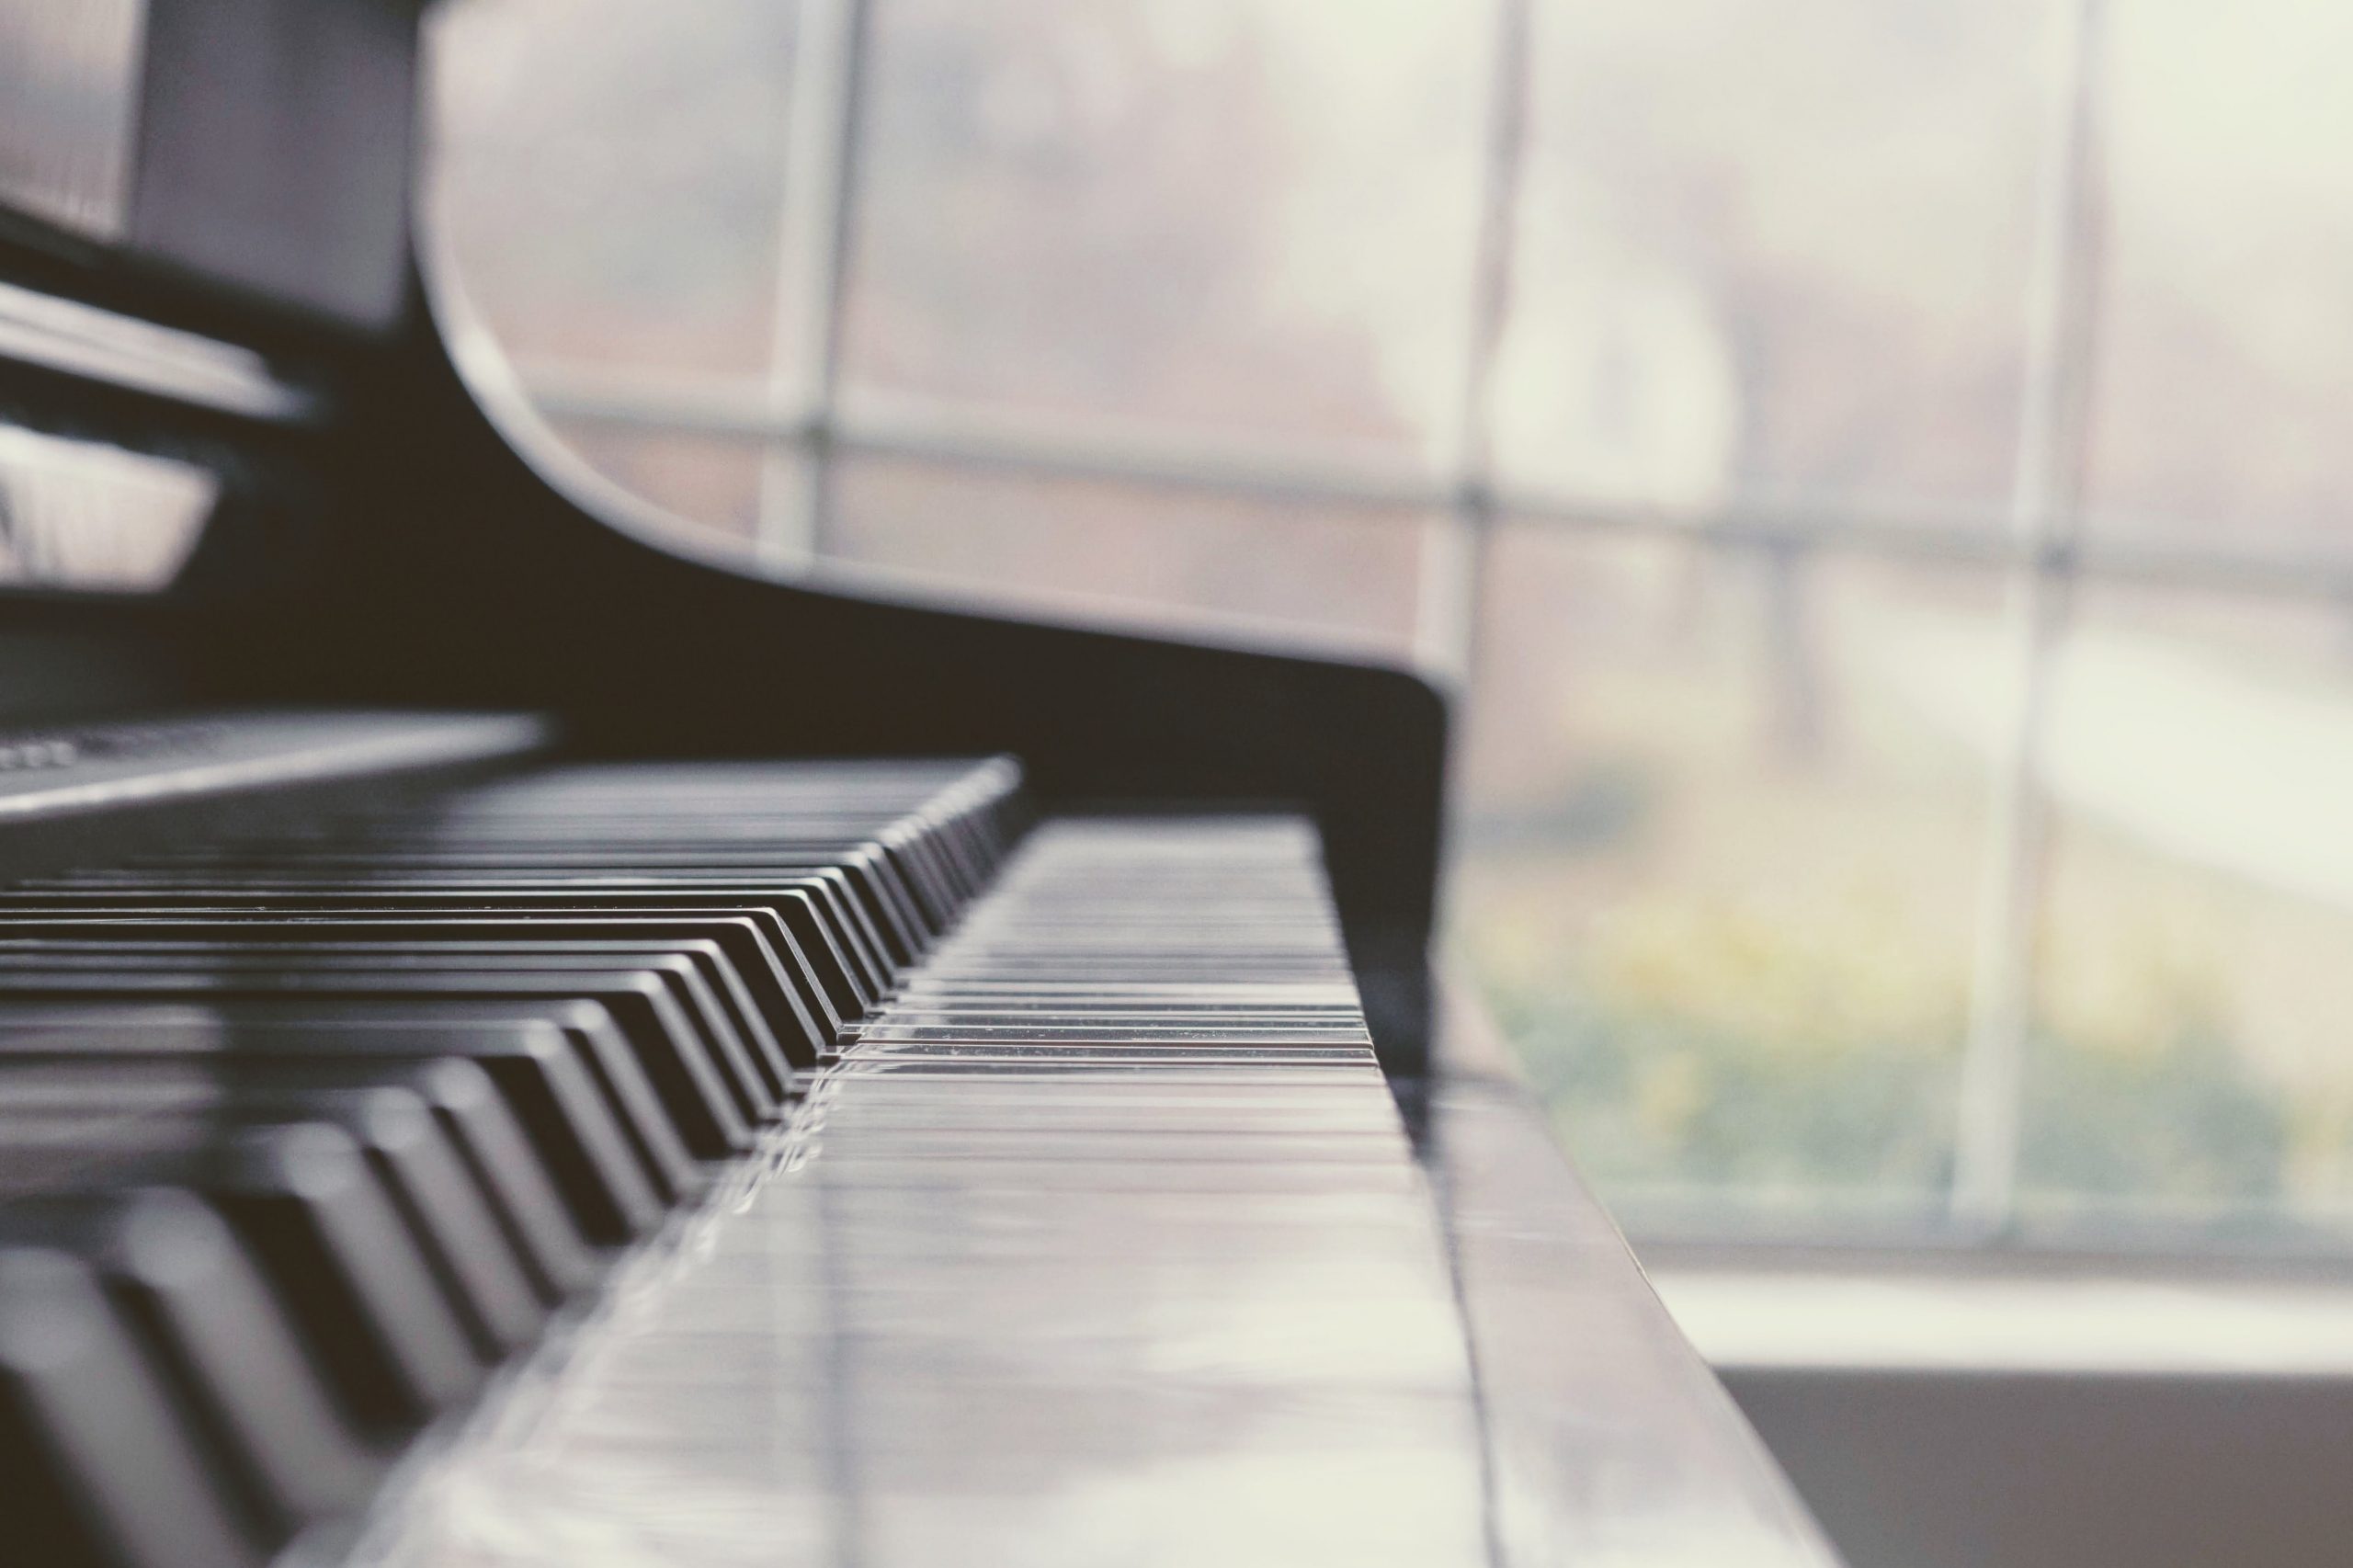 25 Easy Piano Songs That Sound Complicated But Aren't 